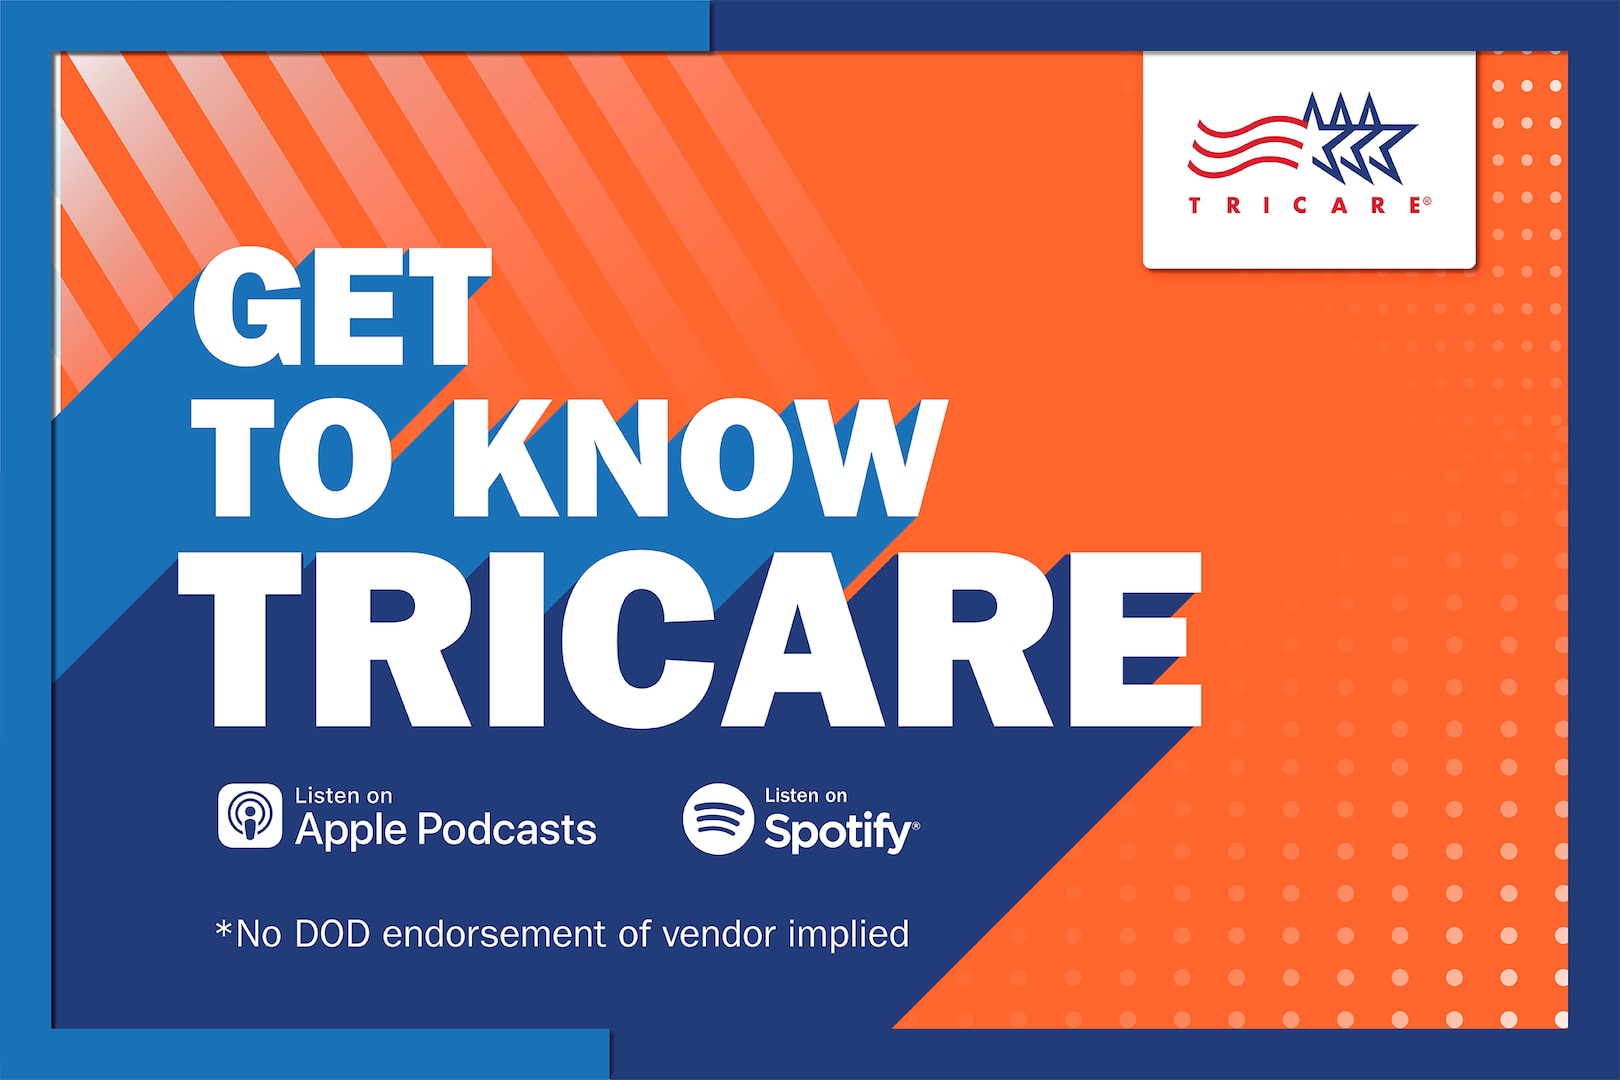 check-out-latest-tricare-for-life-podcast-series-tricare-newsroom